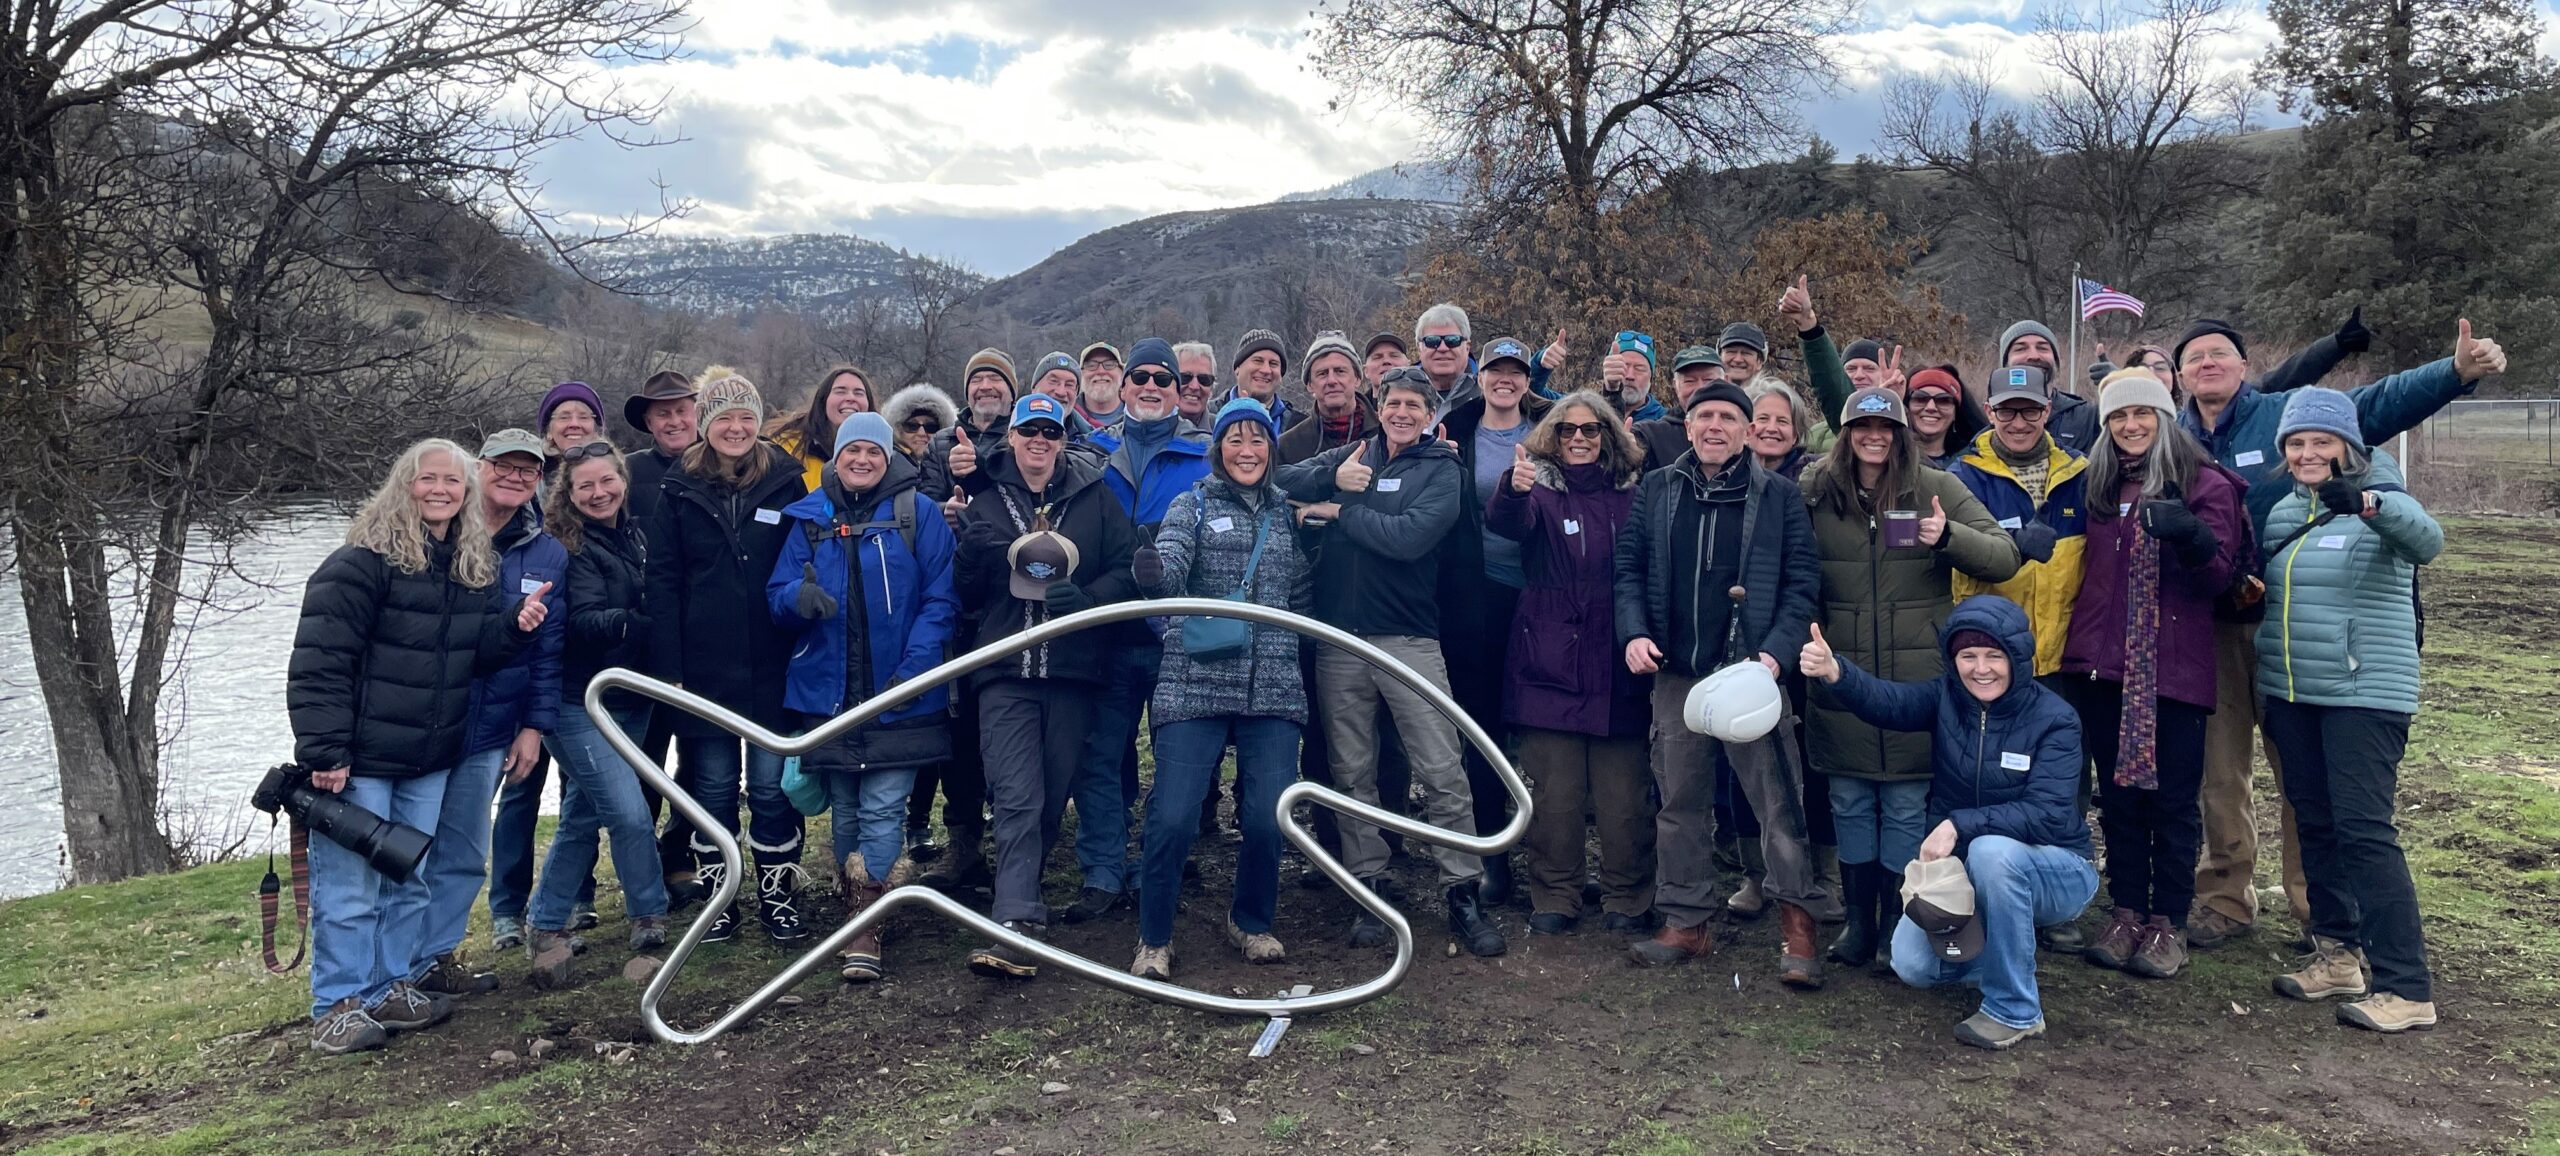 Historic Milestone for Rivers: preparations to remove the Iron Gate Dam on the Klamath River start today with a special visit from the Happy Fish